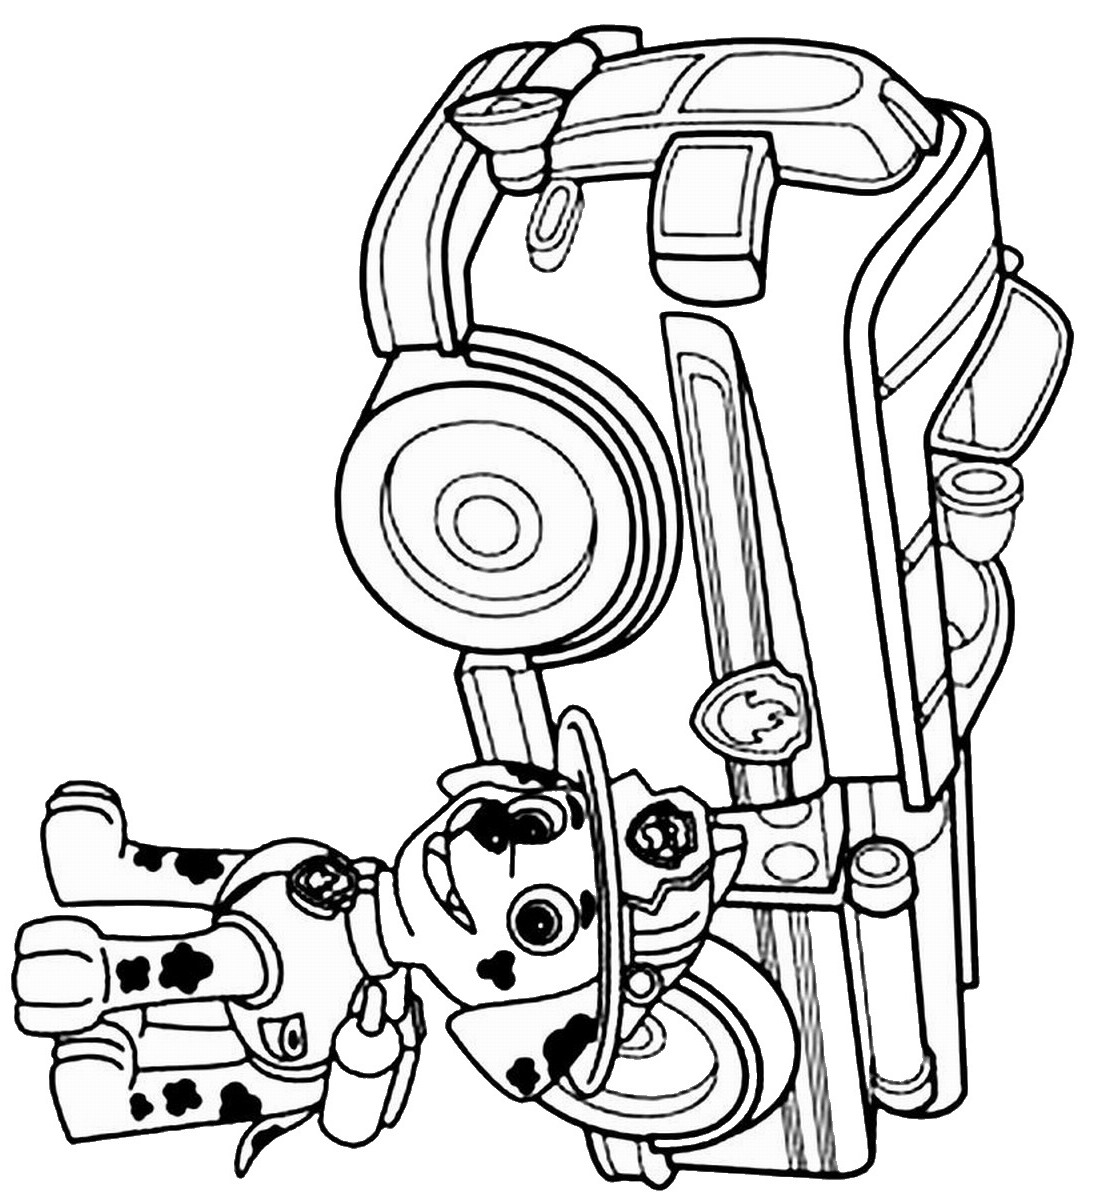 Free Paw Patrol Coloring Pages Marshall And Firetruck, Download Free